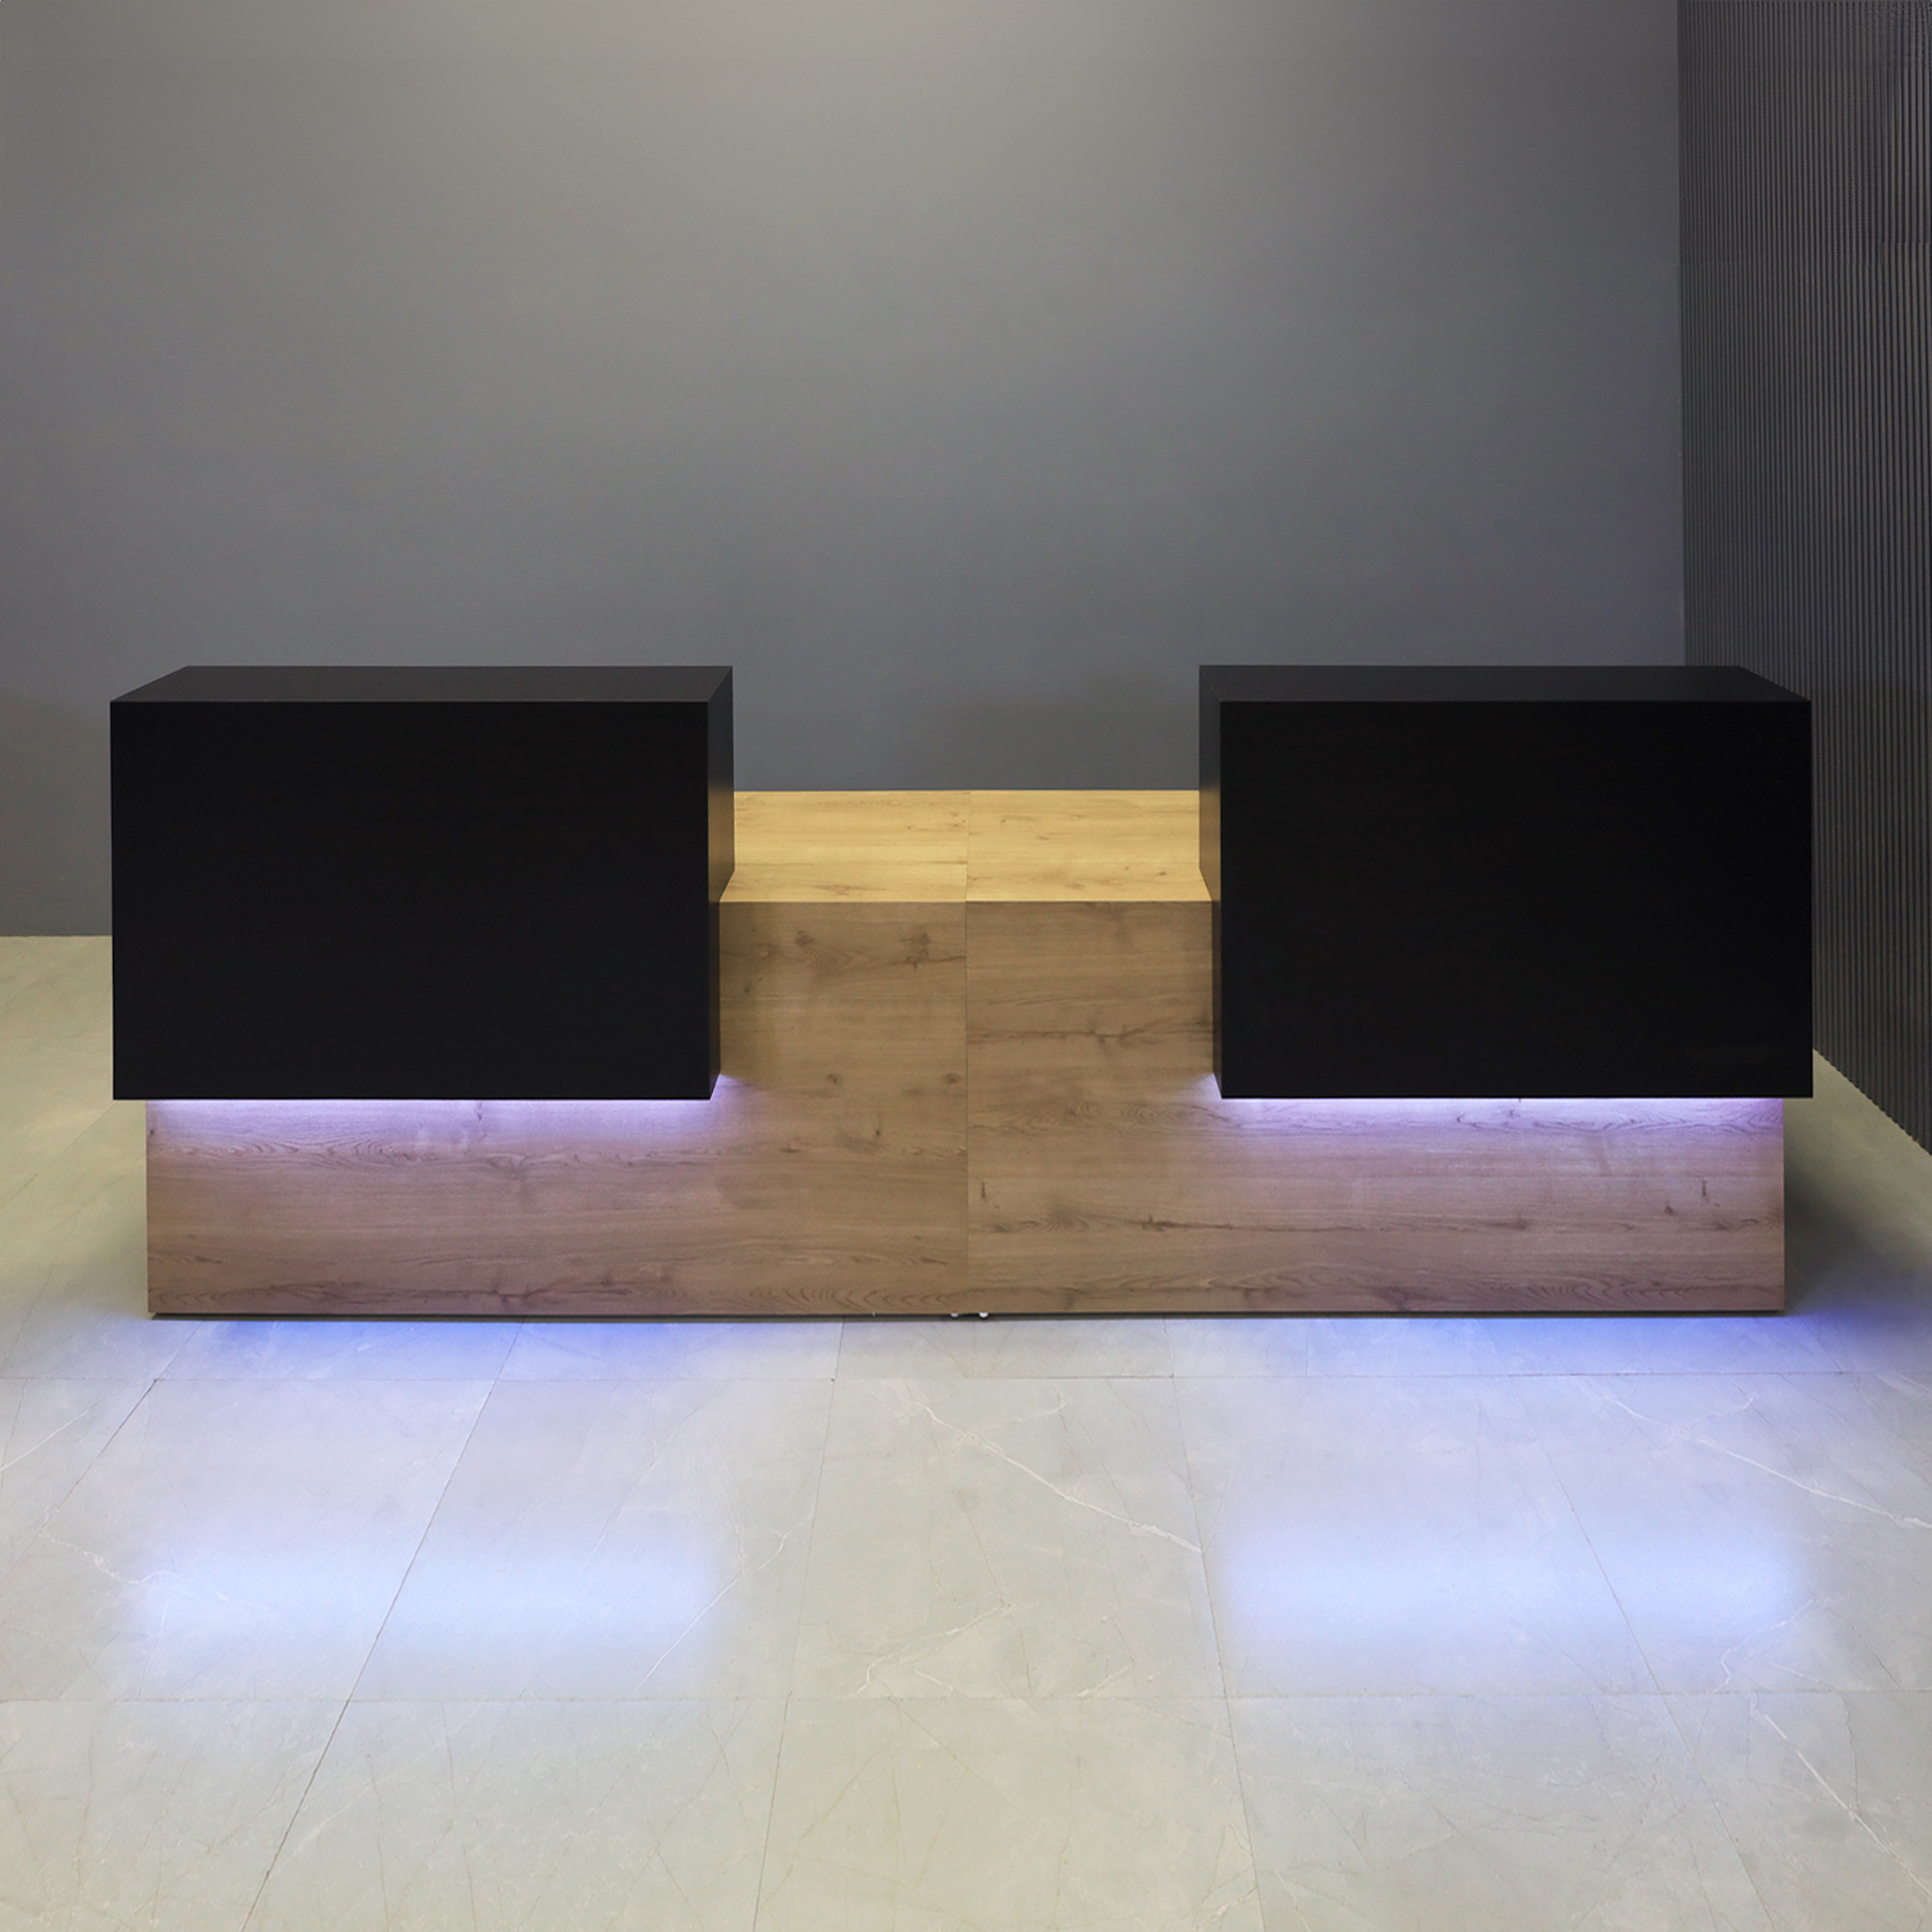 120-inch Los Angeles Double Counter Custom Reception Desk in black matte laminate counters and planked urban oak matte laminate desks, with color LED, shown here.